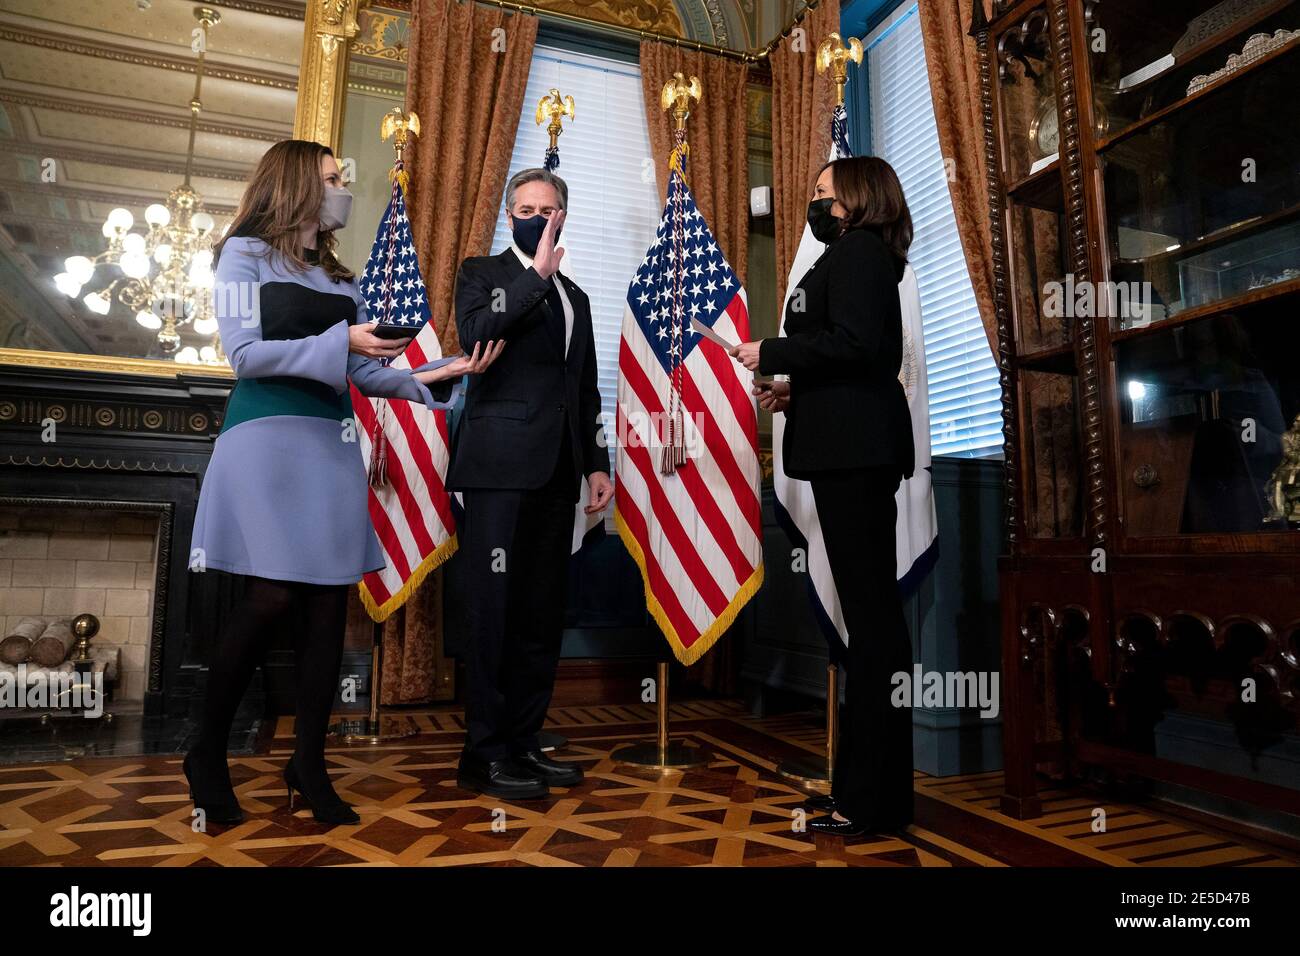 U.S. Vice President Kamala Harris, right, swears in Antony Blinken, U.S. secretary of state, center, during a ceremony at the White House in Washington, DC, U.S., on Wednesday, Jan. 27, 2021. The Senate yesterday confirmed Blinken, giving one of President Biden's longest-serving aides the task of resuming nuclear negotiations with Iran and restoring trust with allies shaken by four years of the Trump administration. At left is Blinken's wife, Evan Ryan, who serves as President Biden's cabinet secretaryCredit: Stefani Reynolds/Pool via CNP | usage worldwide Stock Photo